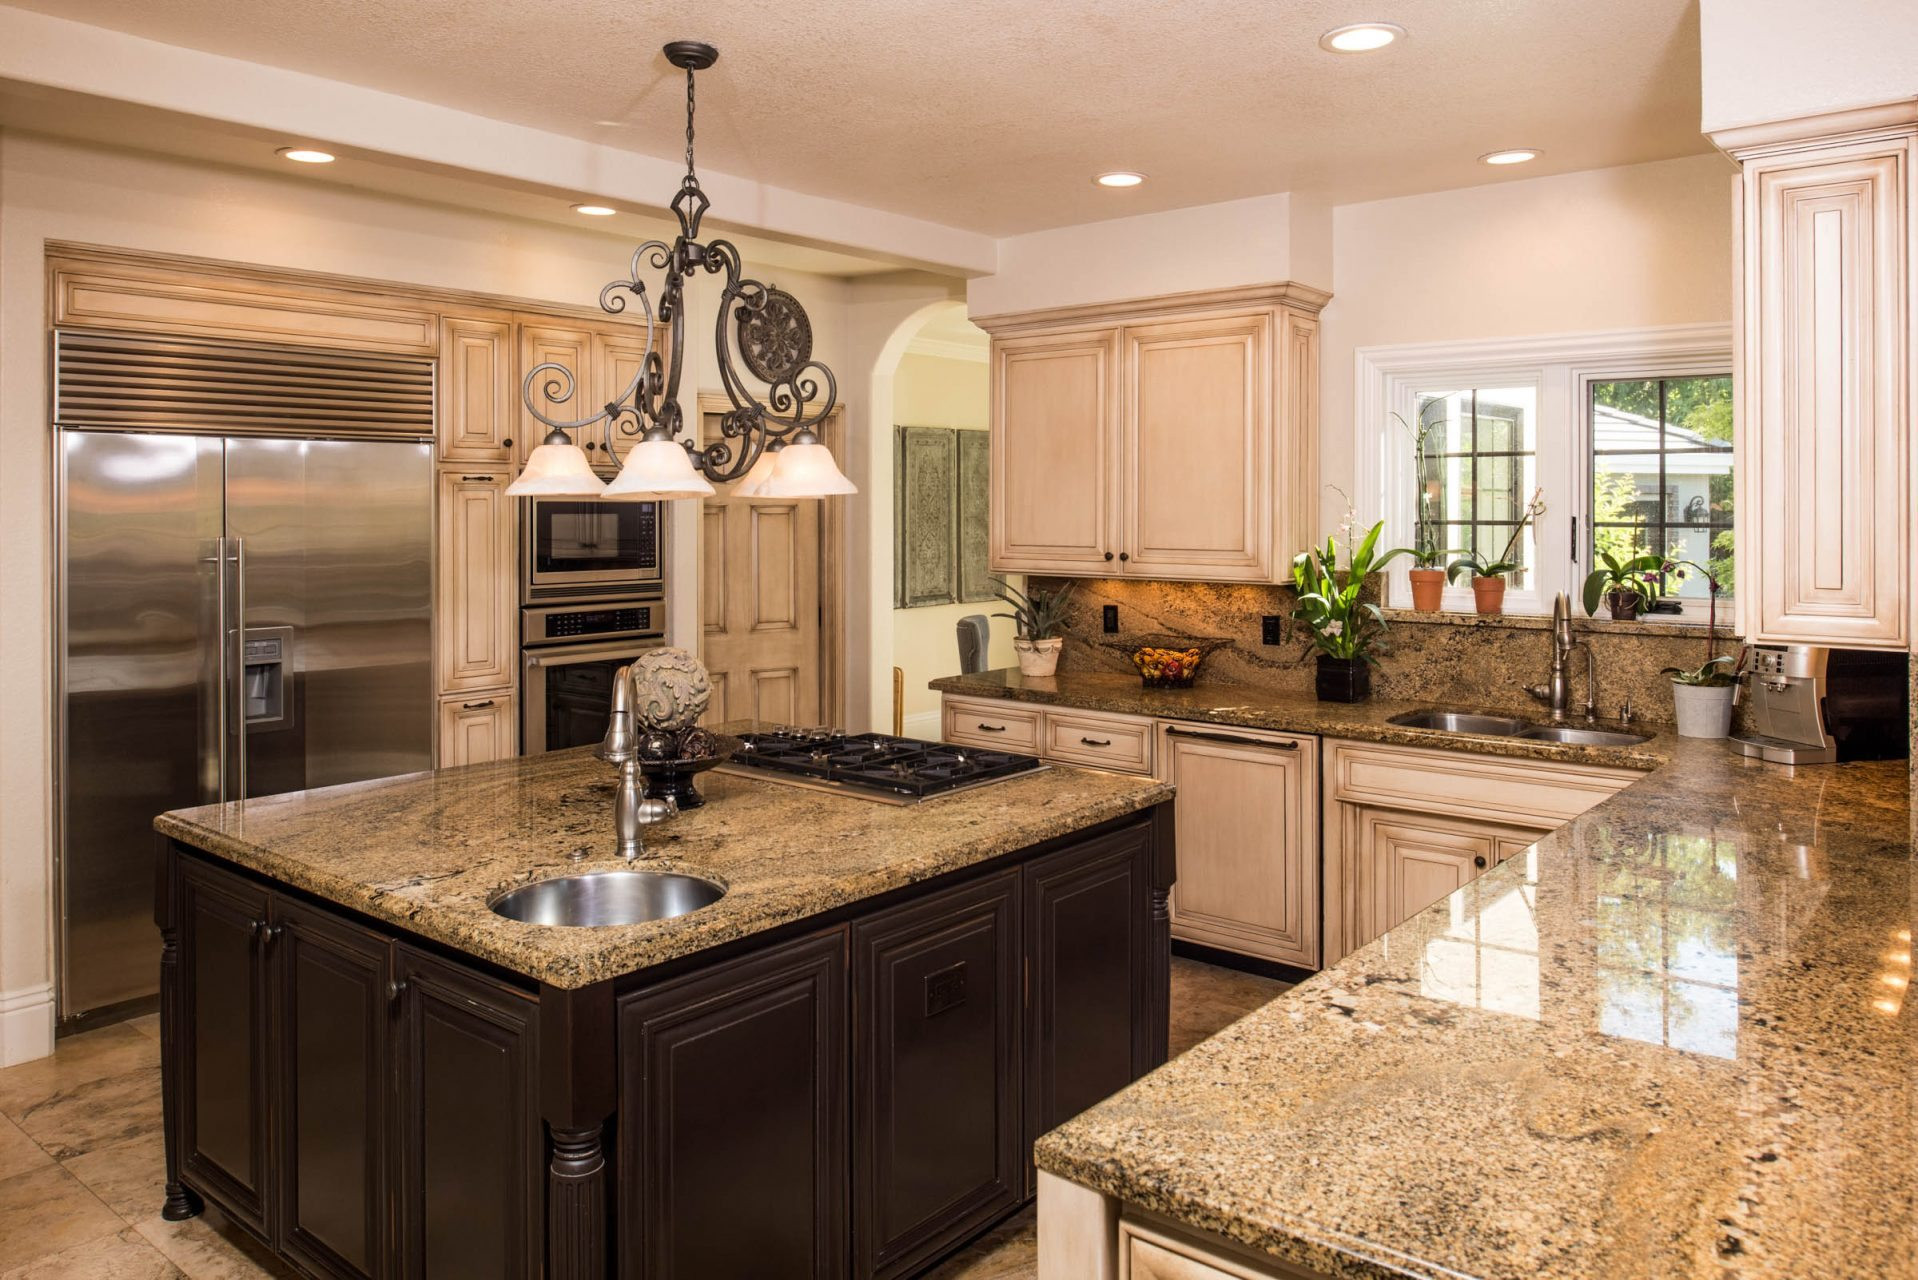 Remodel My Kitchen
 Expert Home Remodelers Building Pros